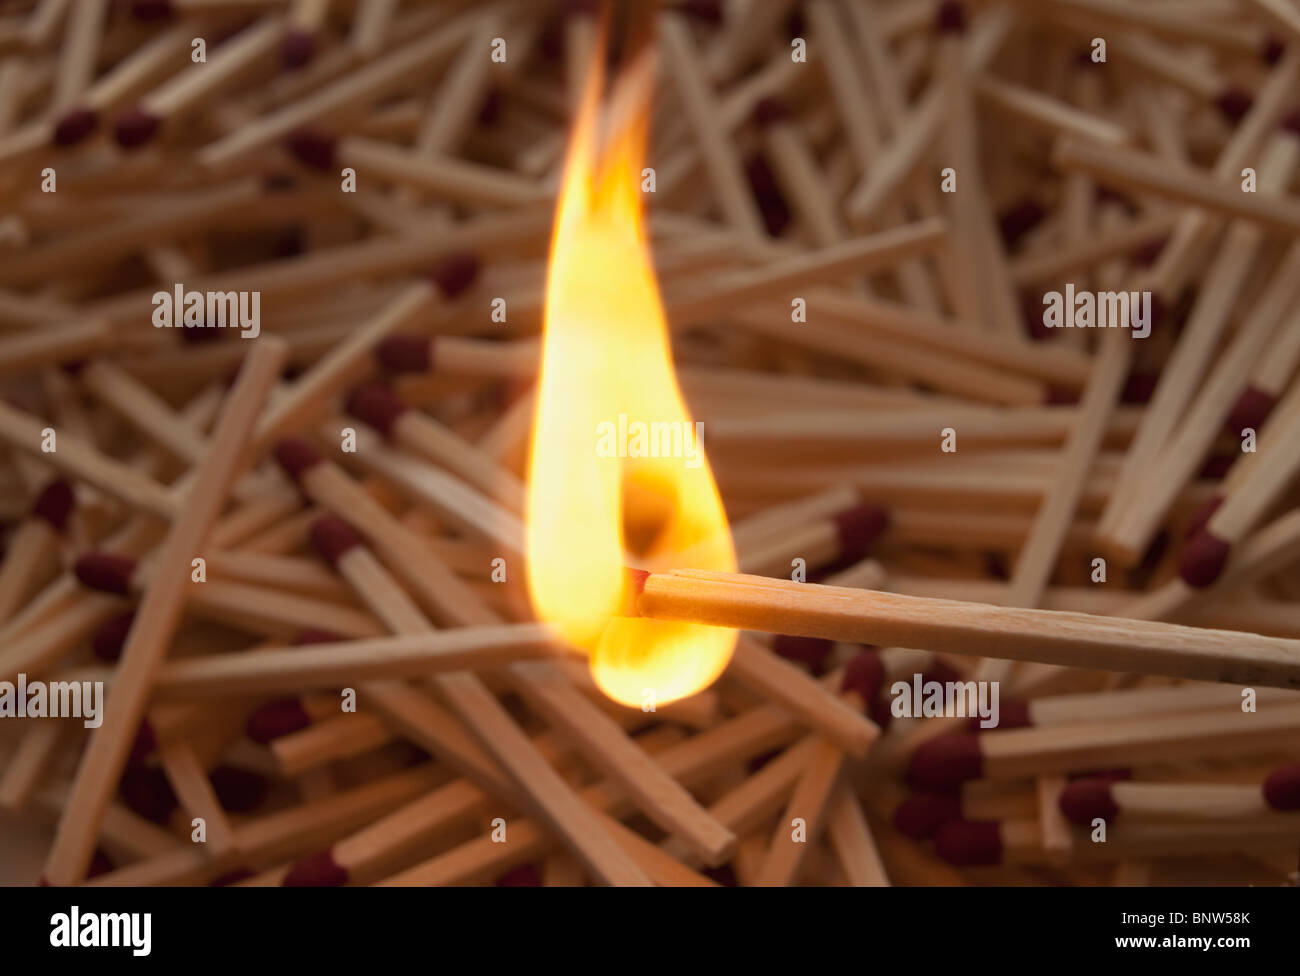 Lit match on top of a pile of wooden matches Stock Photo